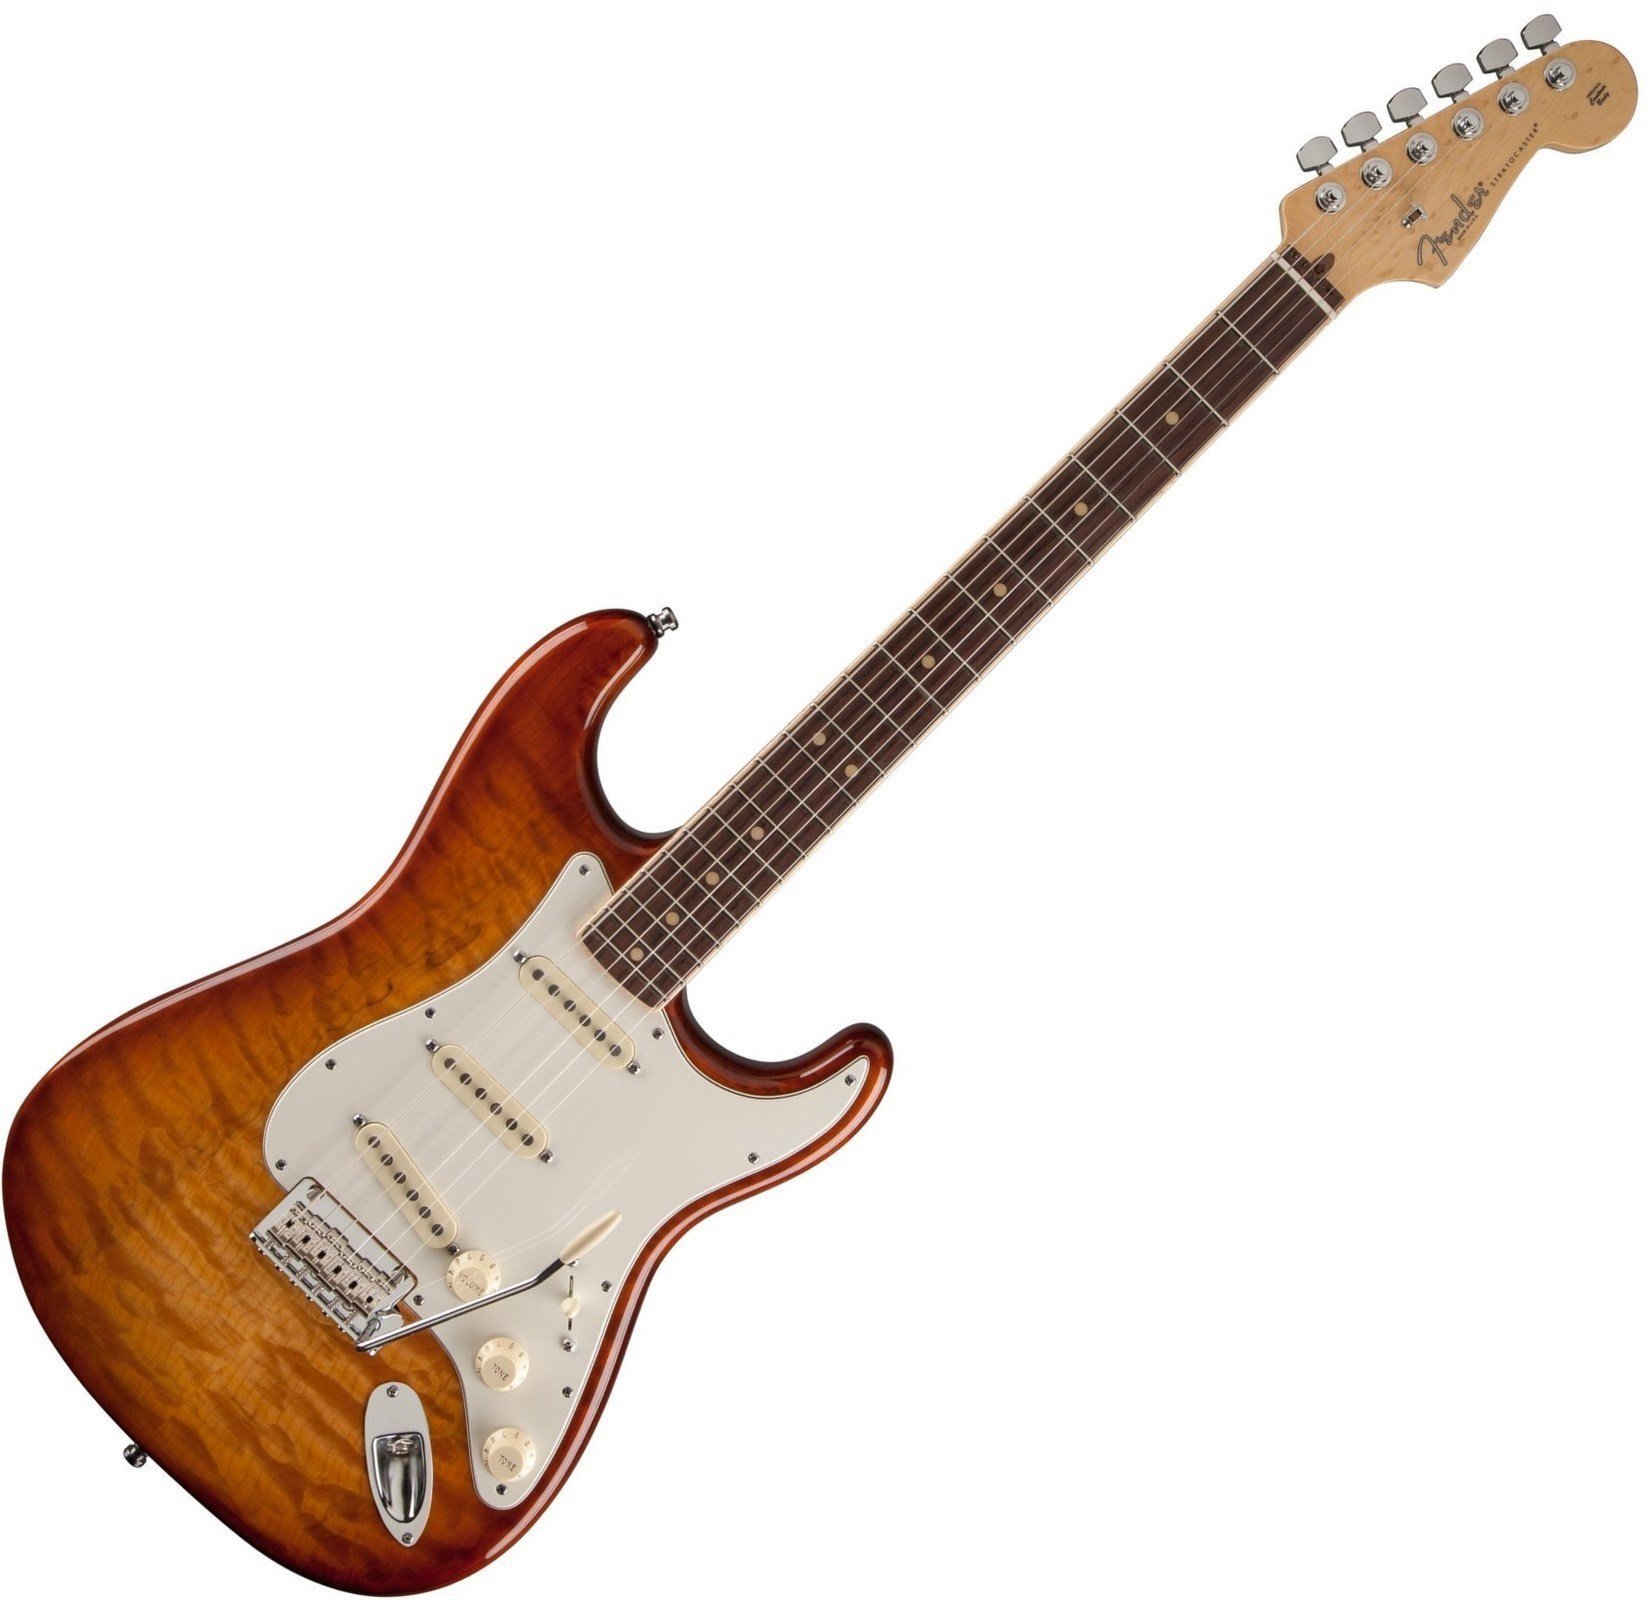 E-Gitarre Fender Deluxe Stratocaster HSS Plus Top with iOS Connectivity, Rosewood Fingerboard, Tobacco Sunburst